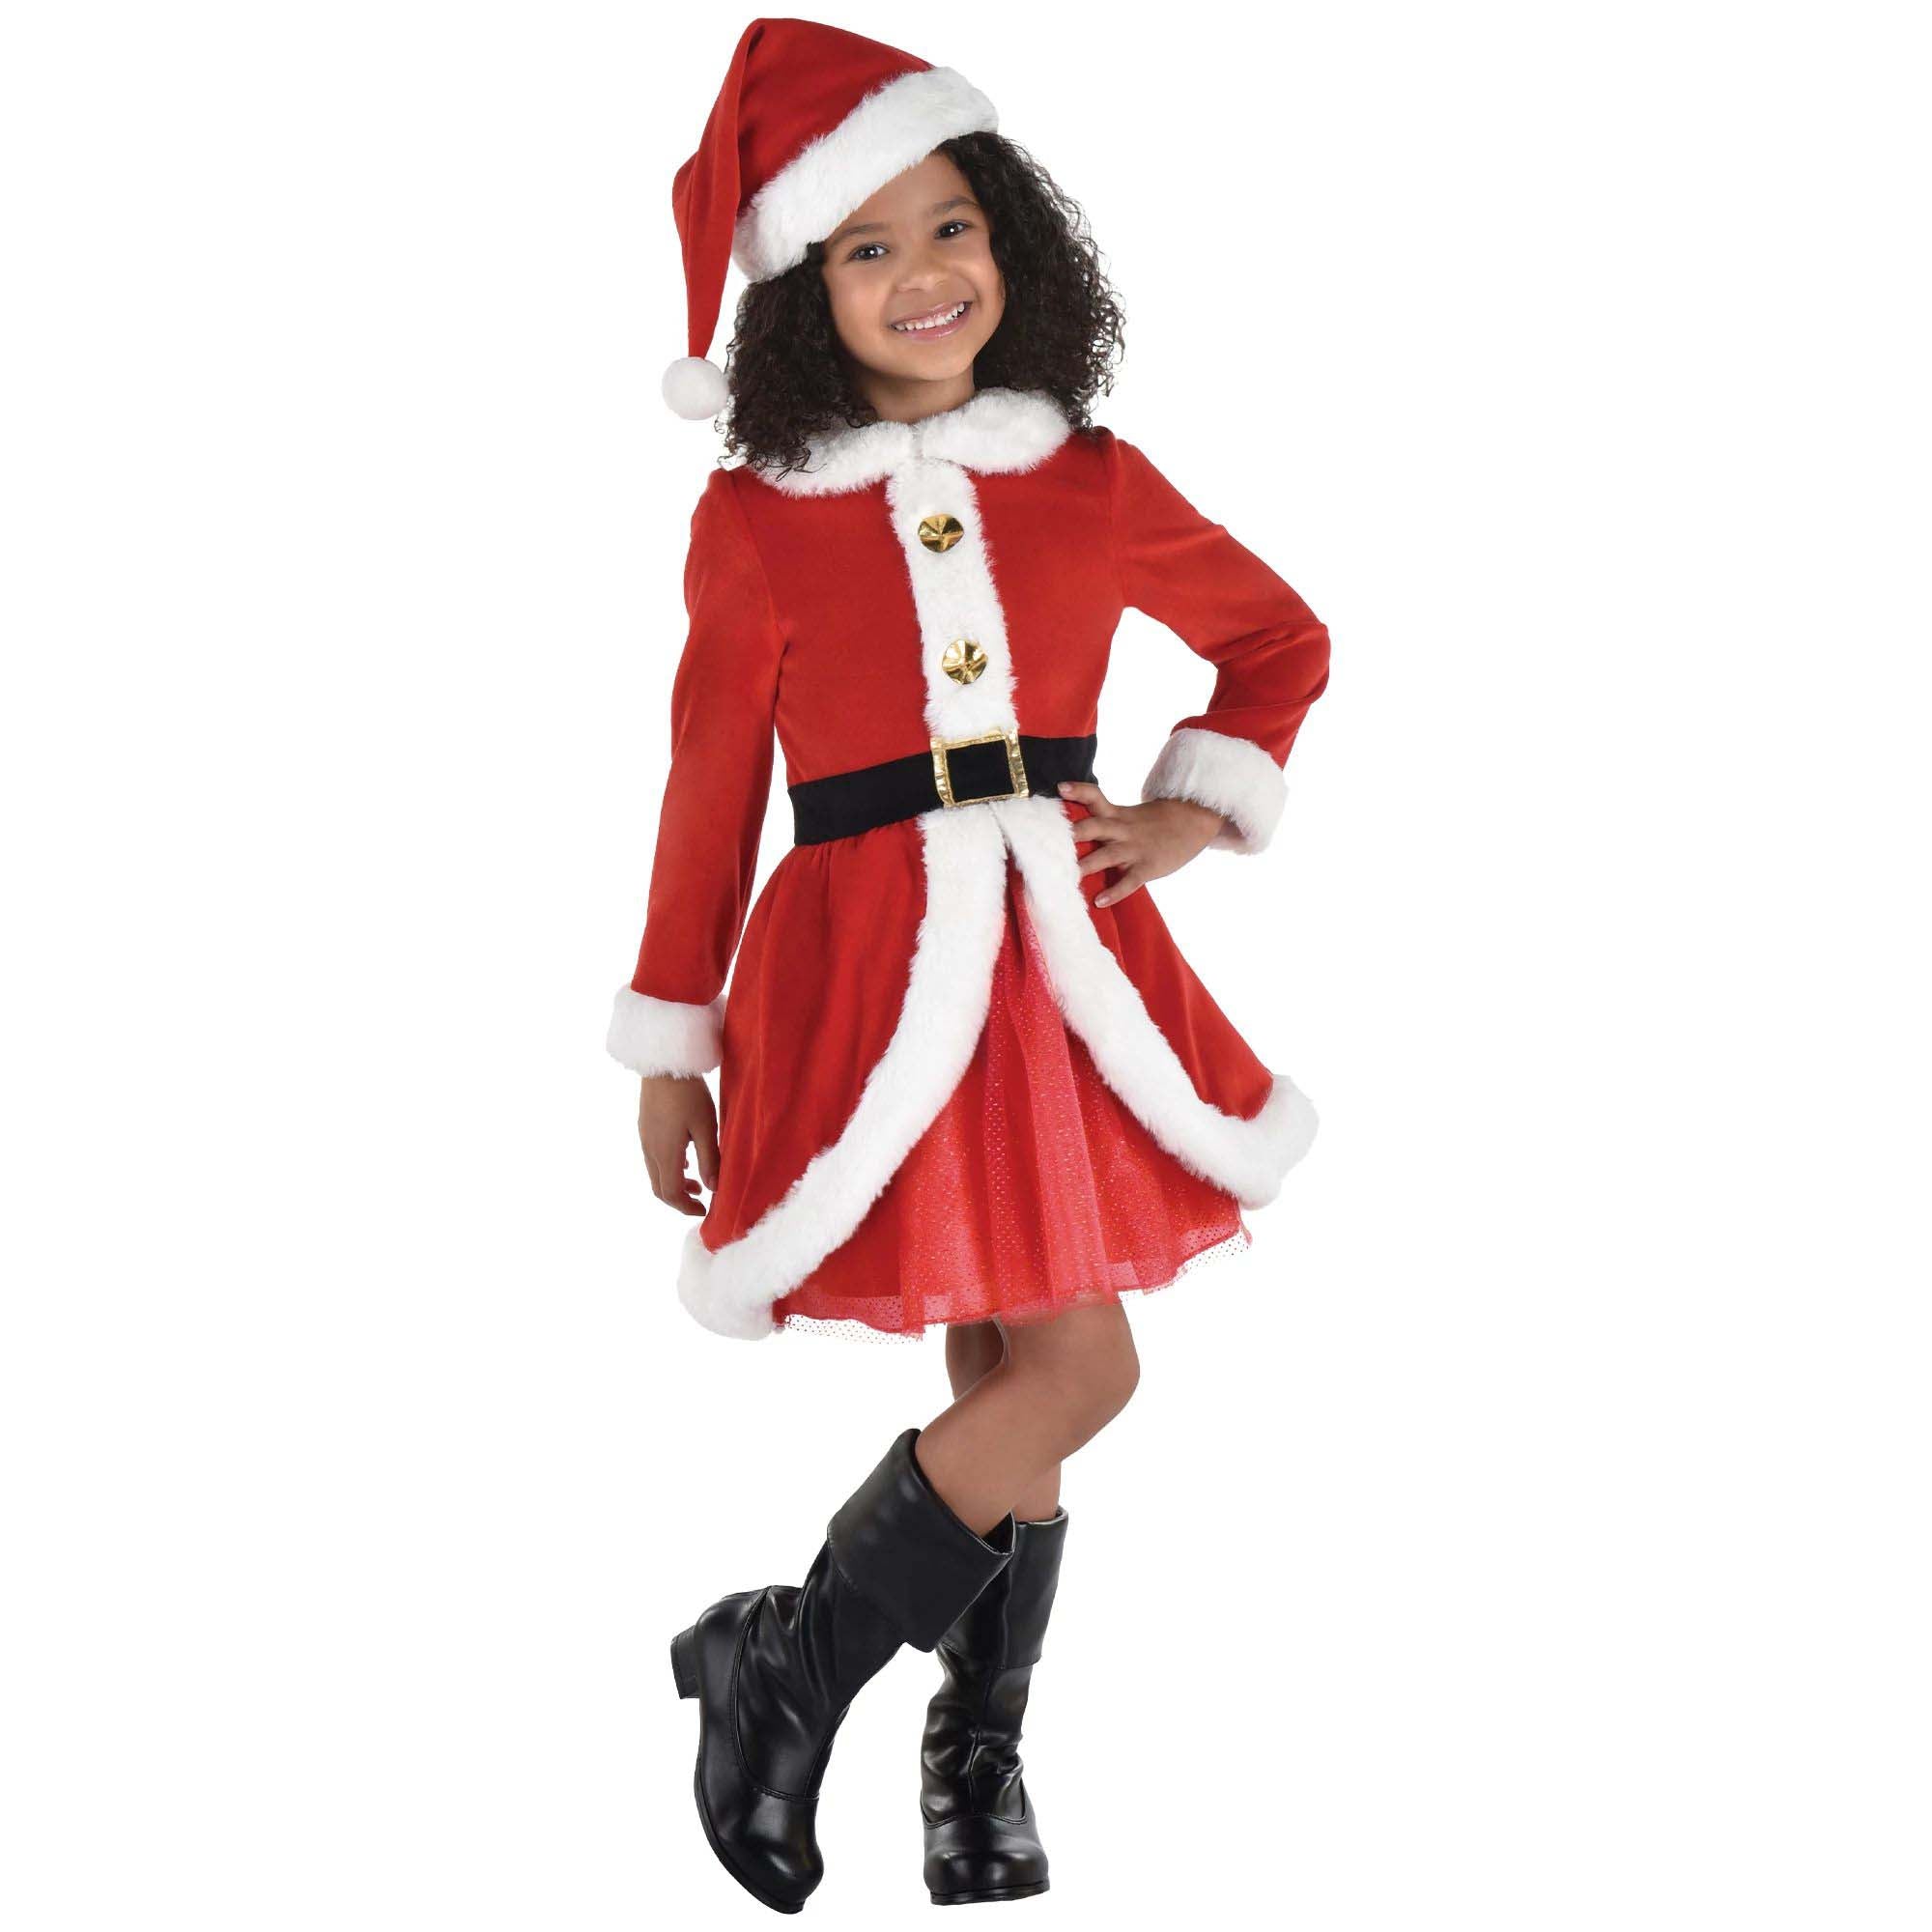 Mrs. Claus Costume for Kids, Red Dress and Hat